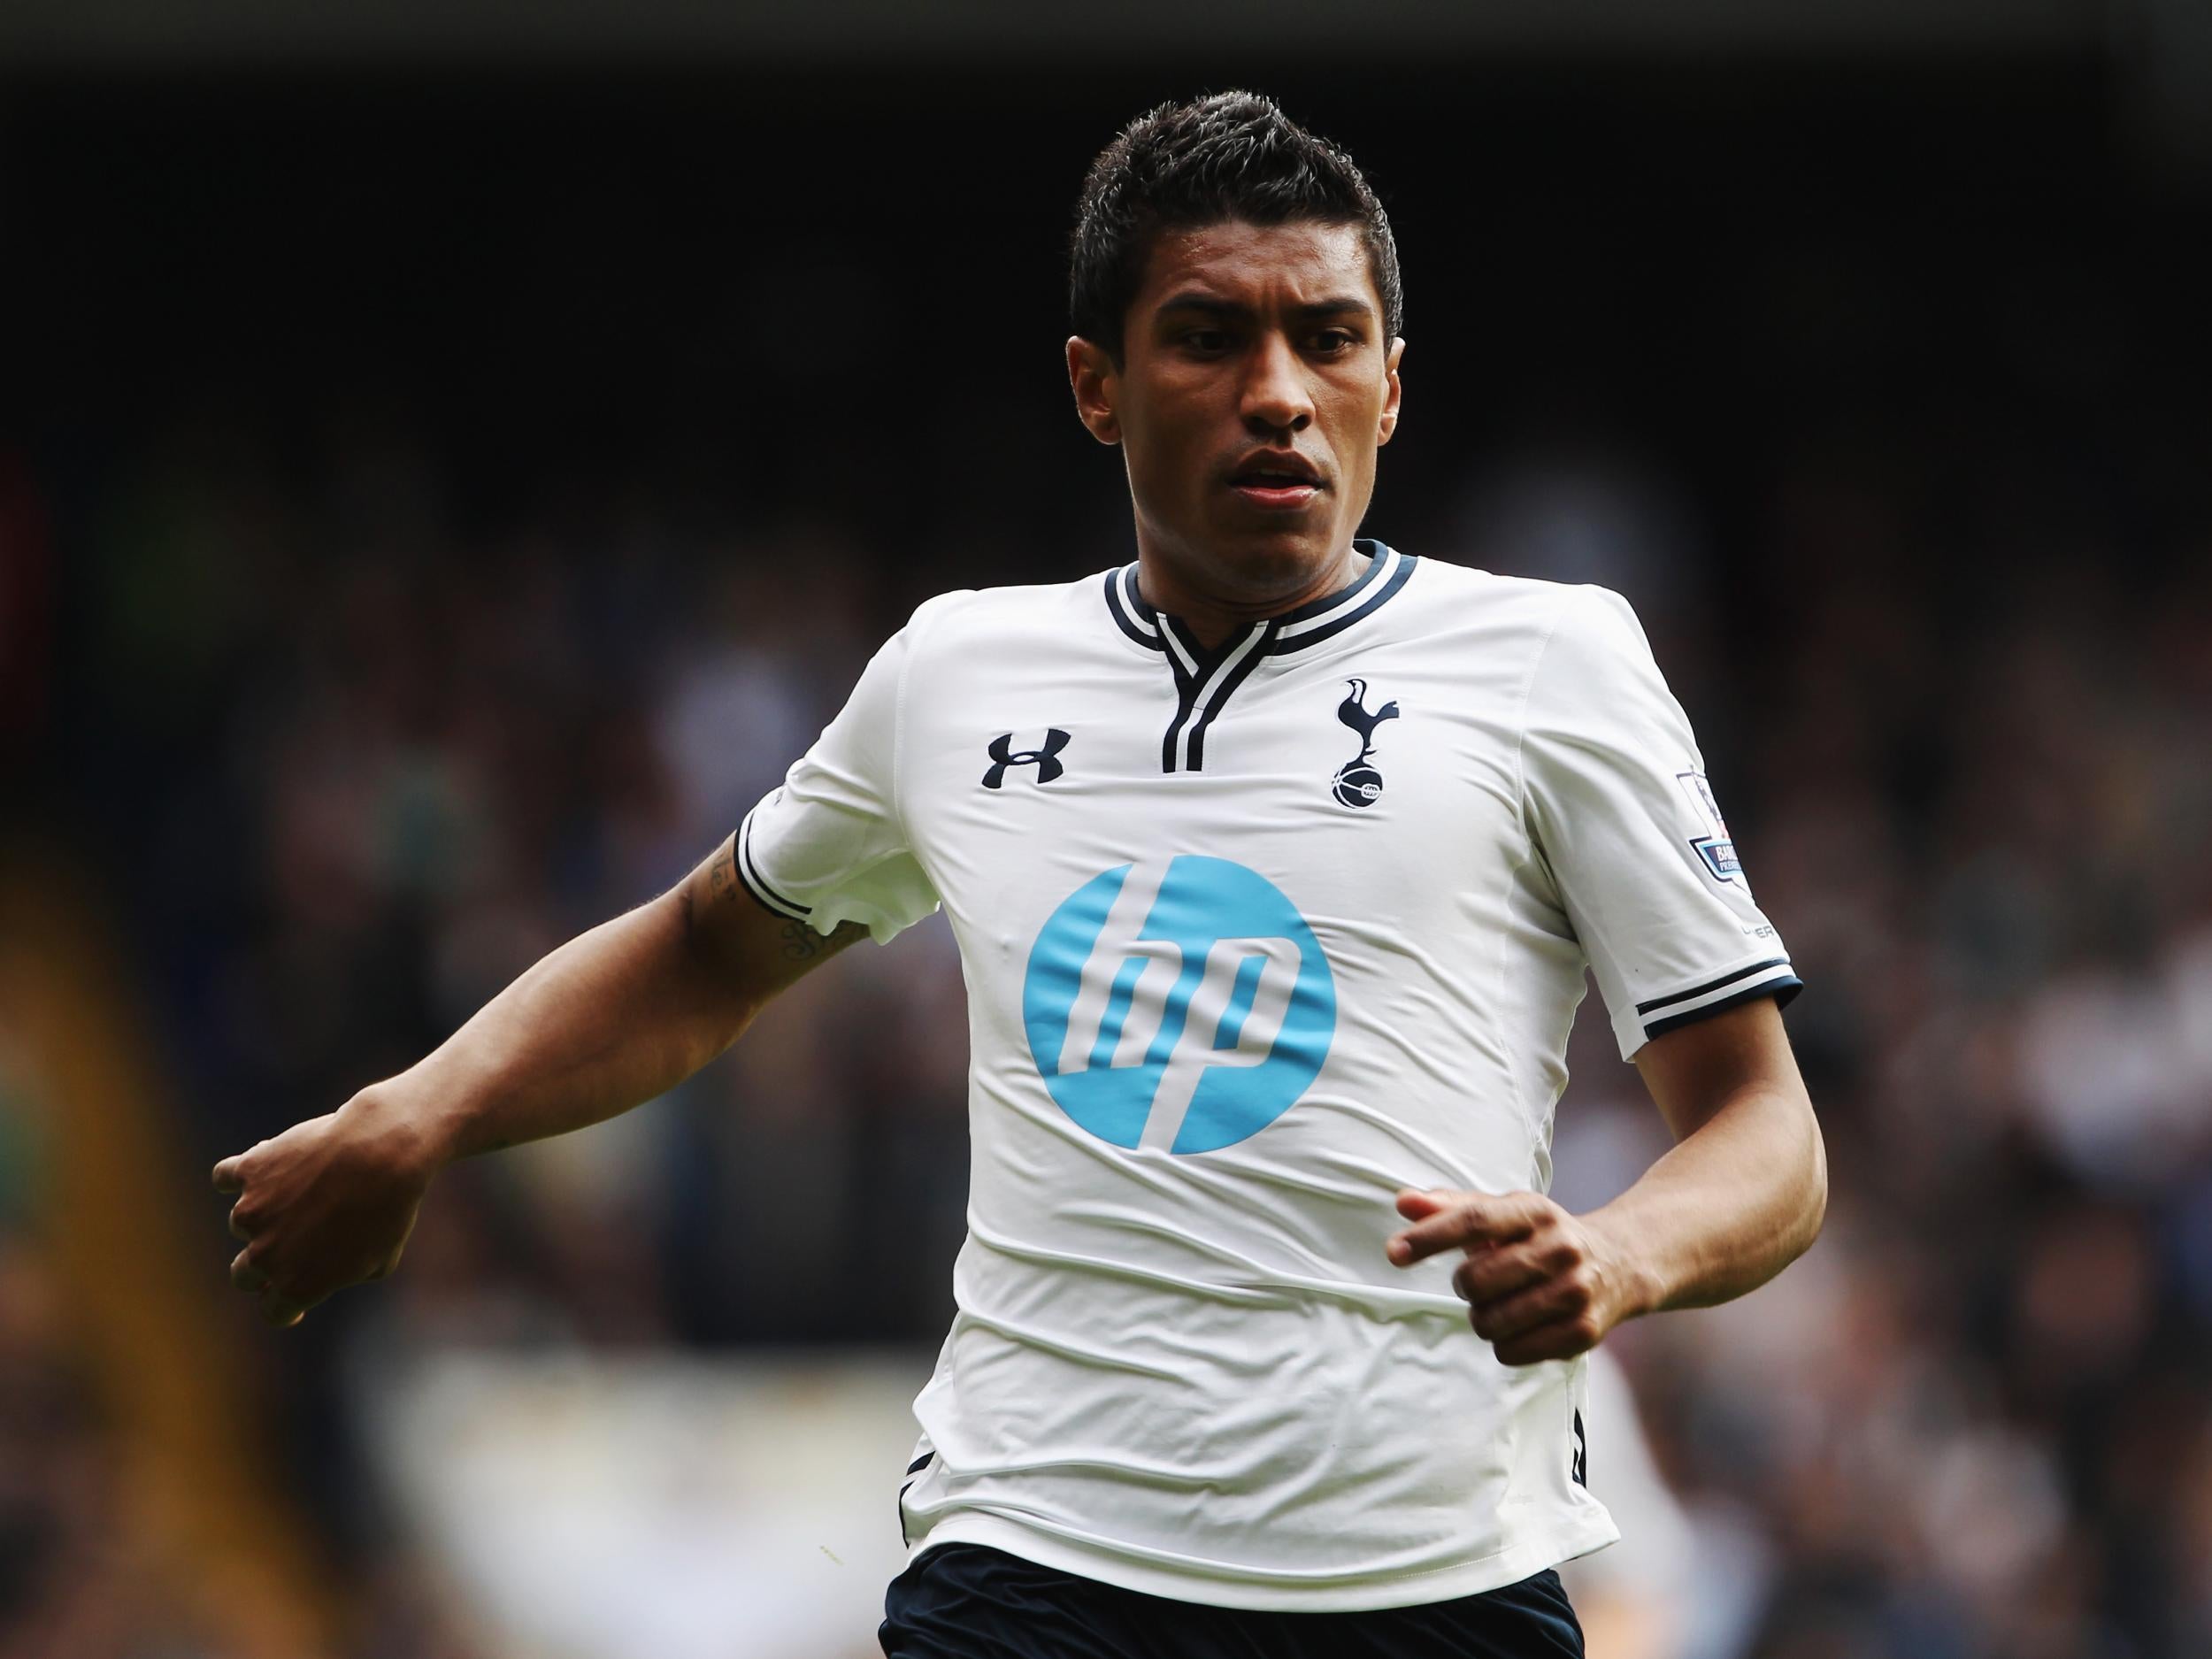 Paulinho spent two seasons at Spurs before being offloaded to China